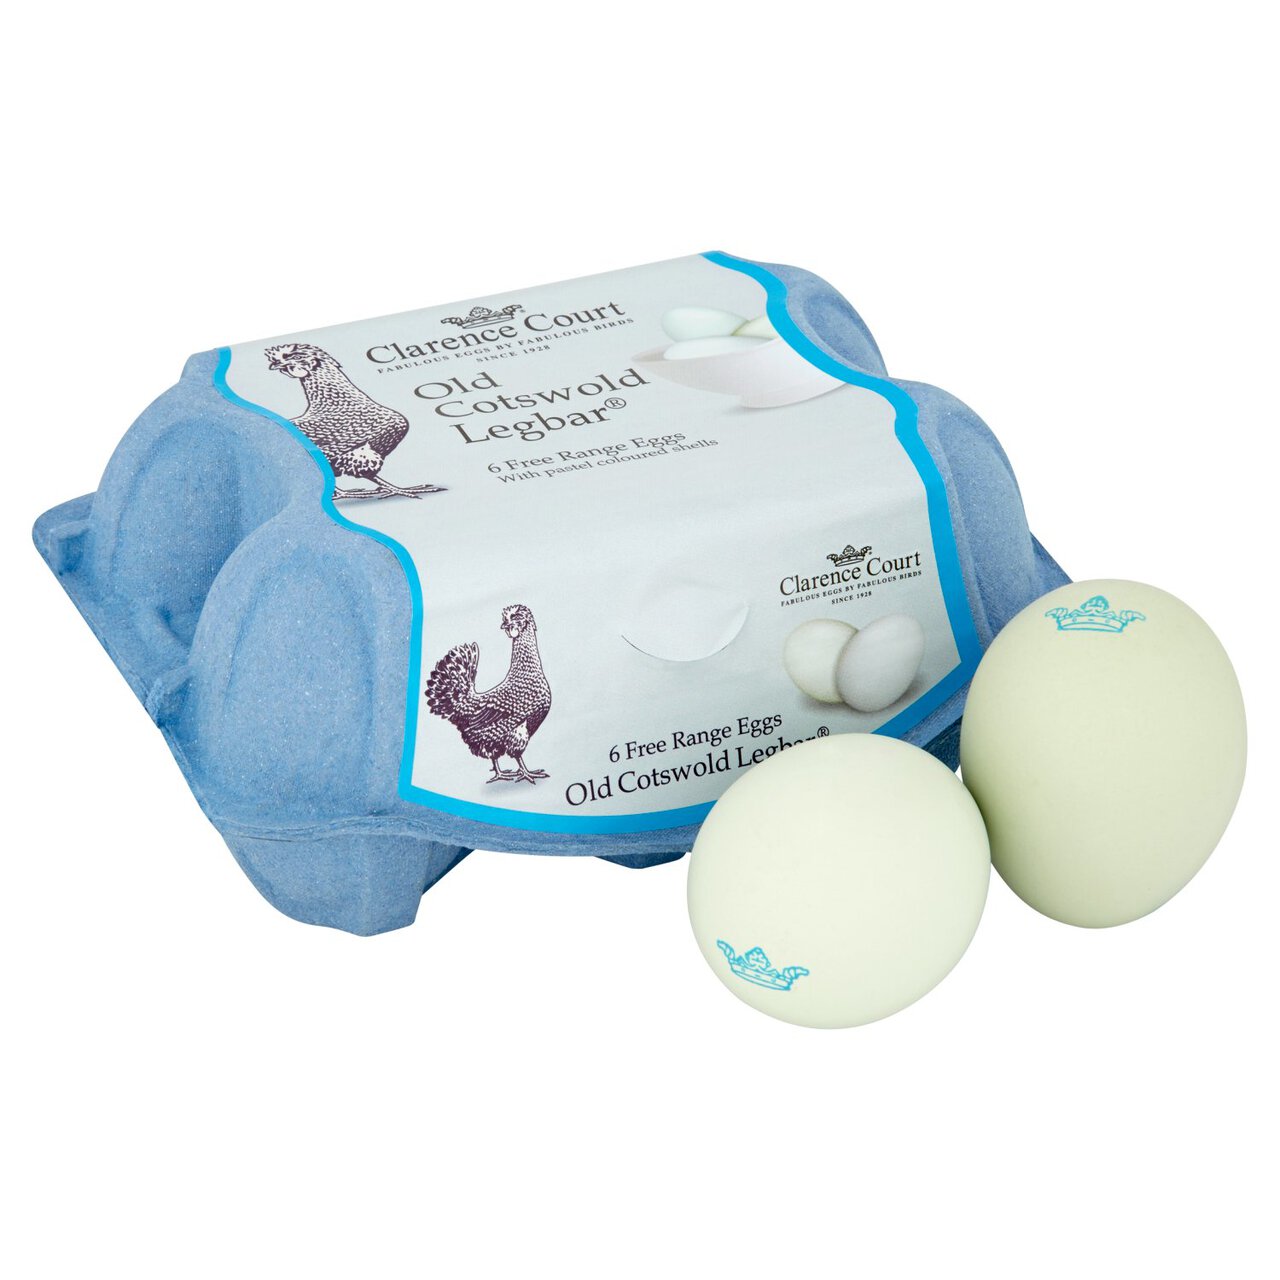 Clarence Court Cotswold Legbar Free Range Blue Assorted Eggs 6 per pack